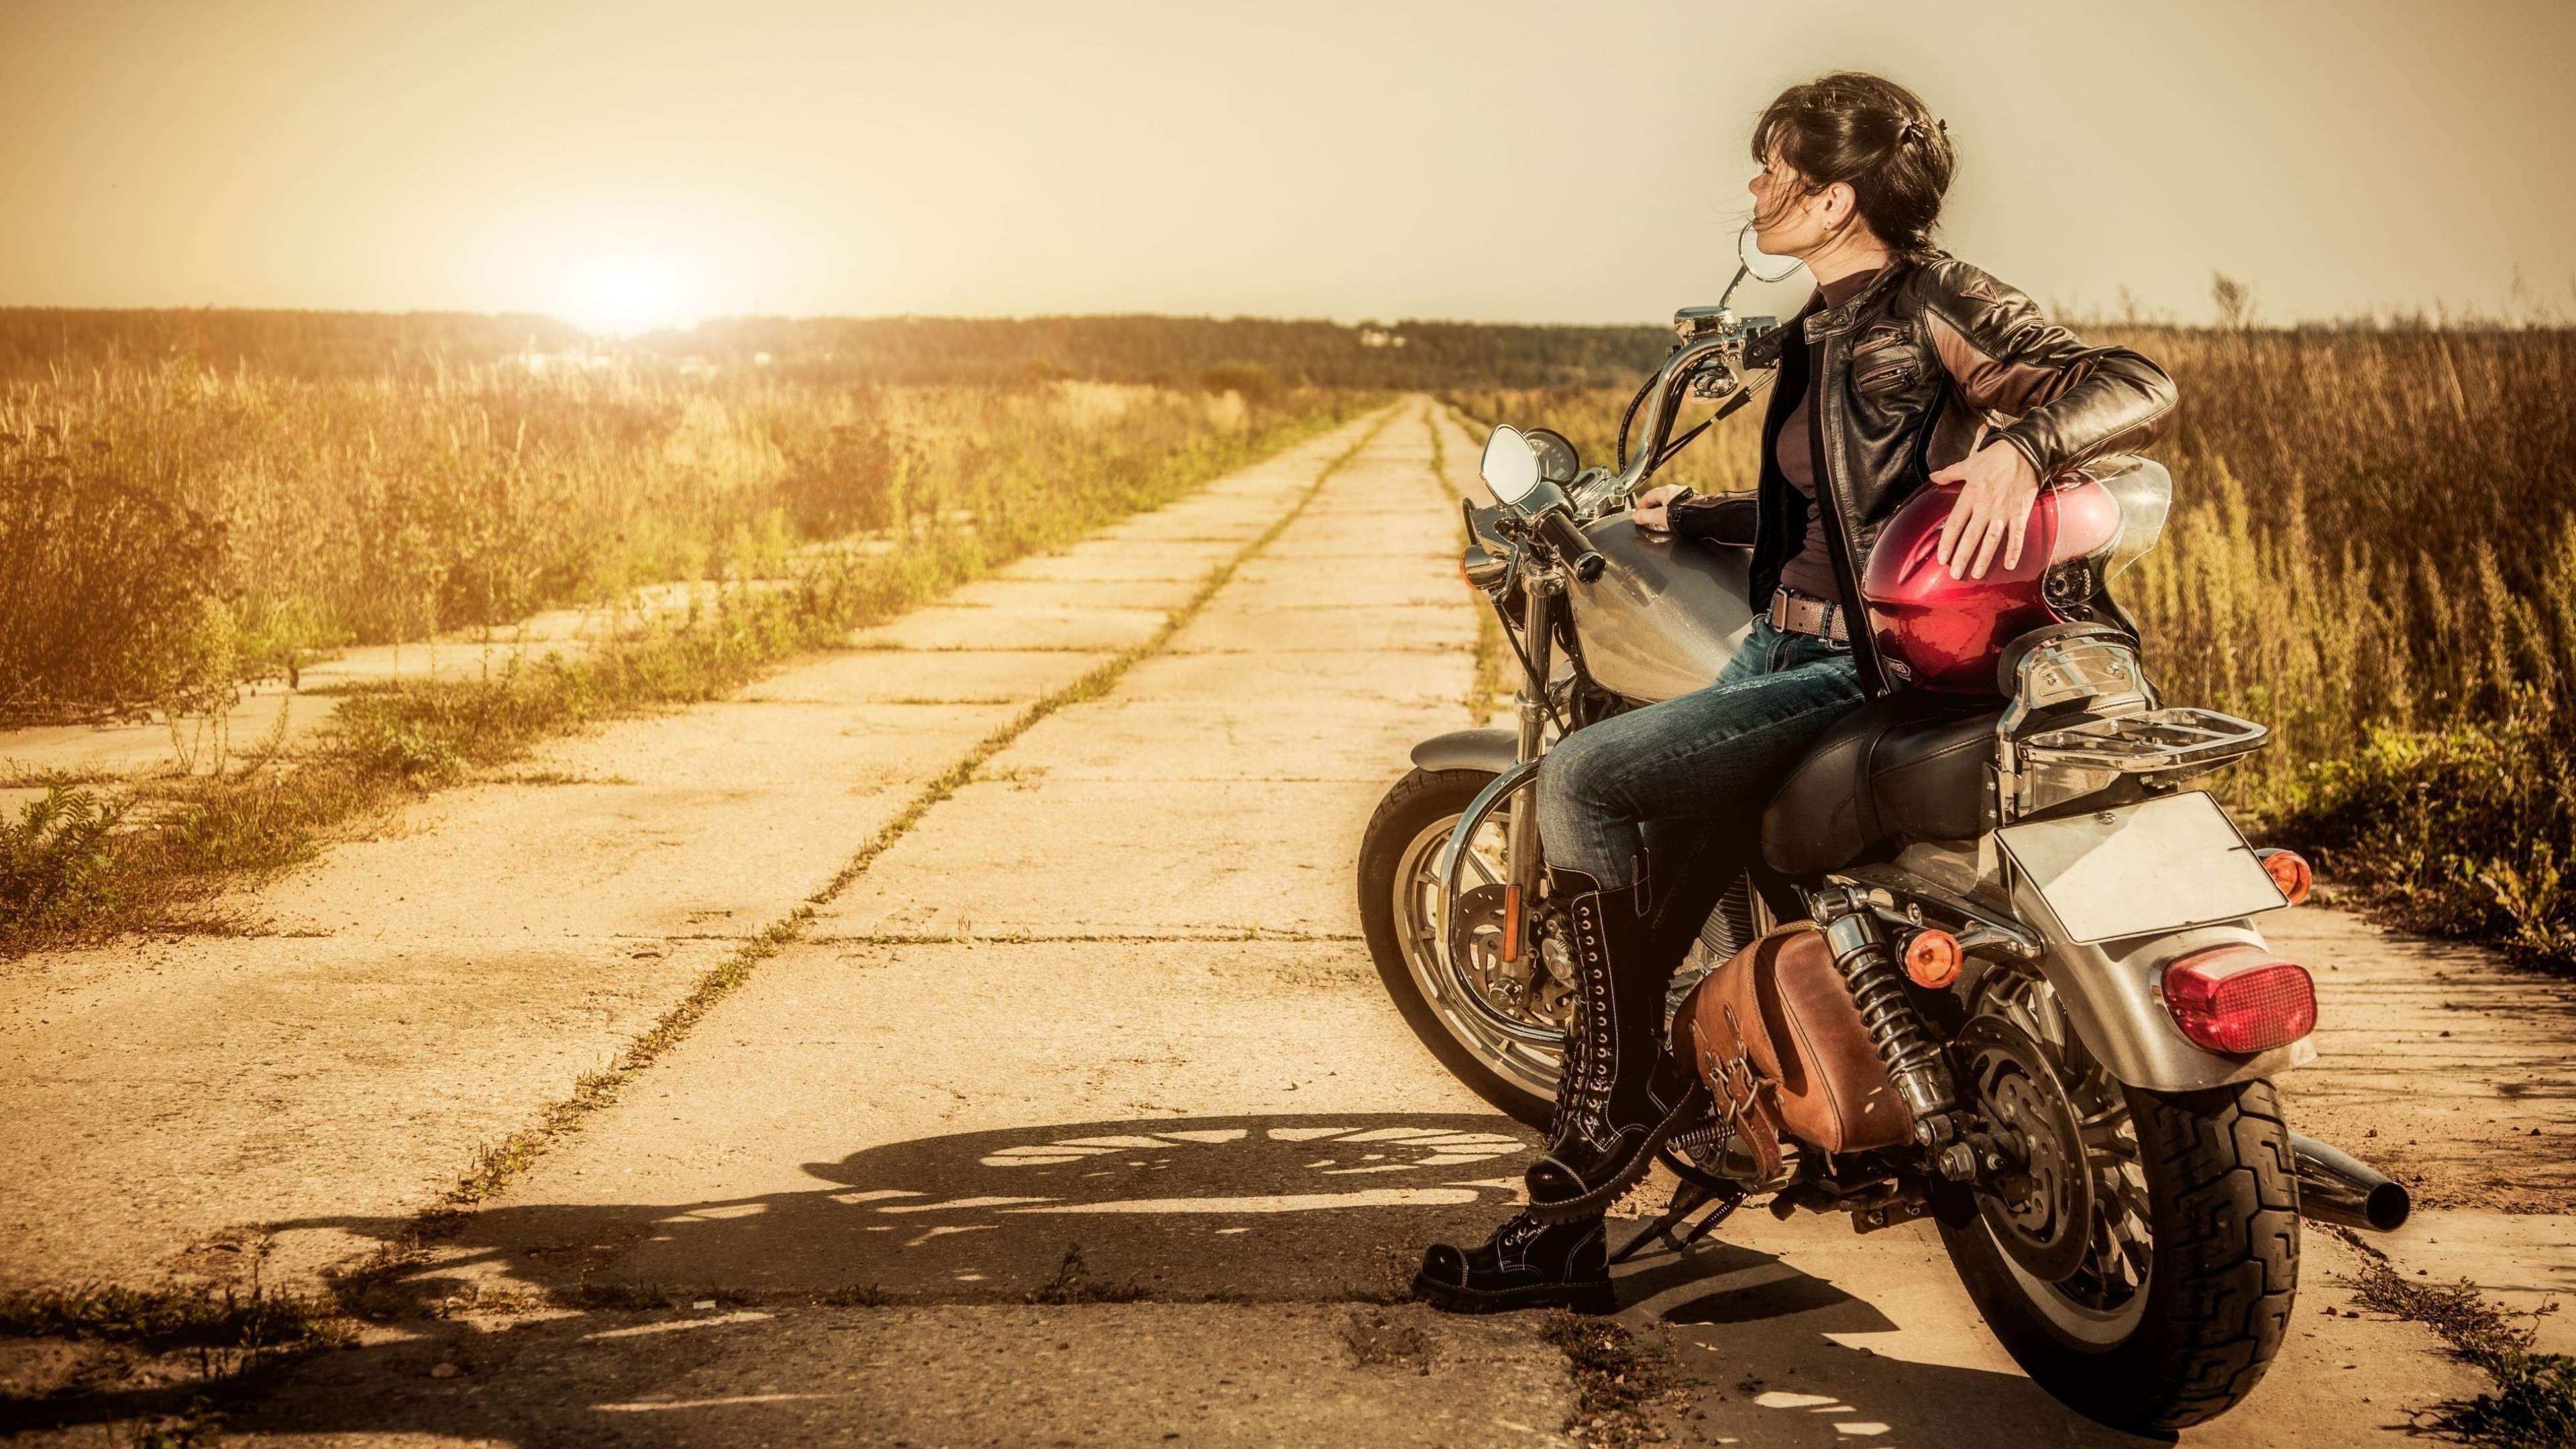 Woman On Motorcycle Wallpaper